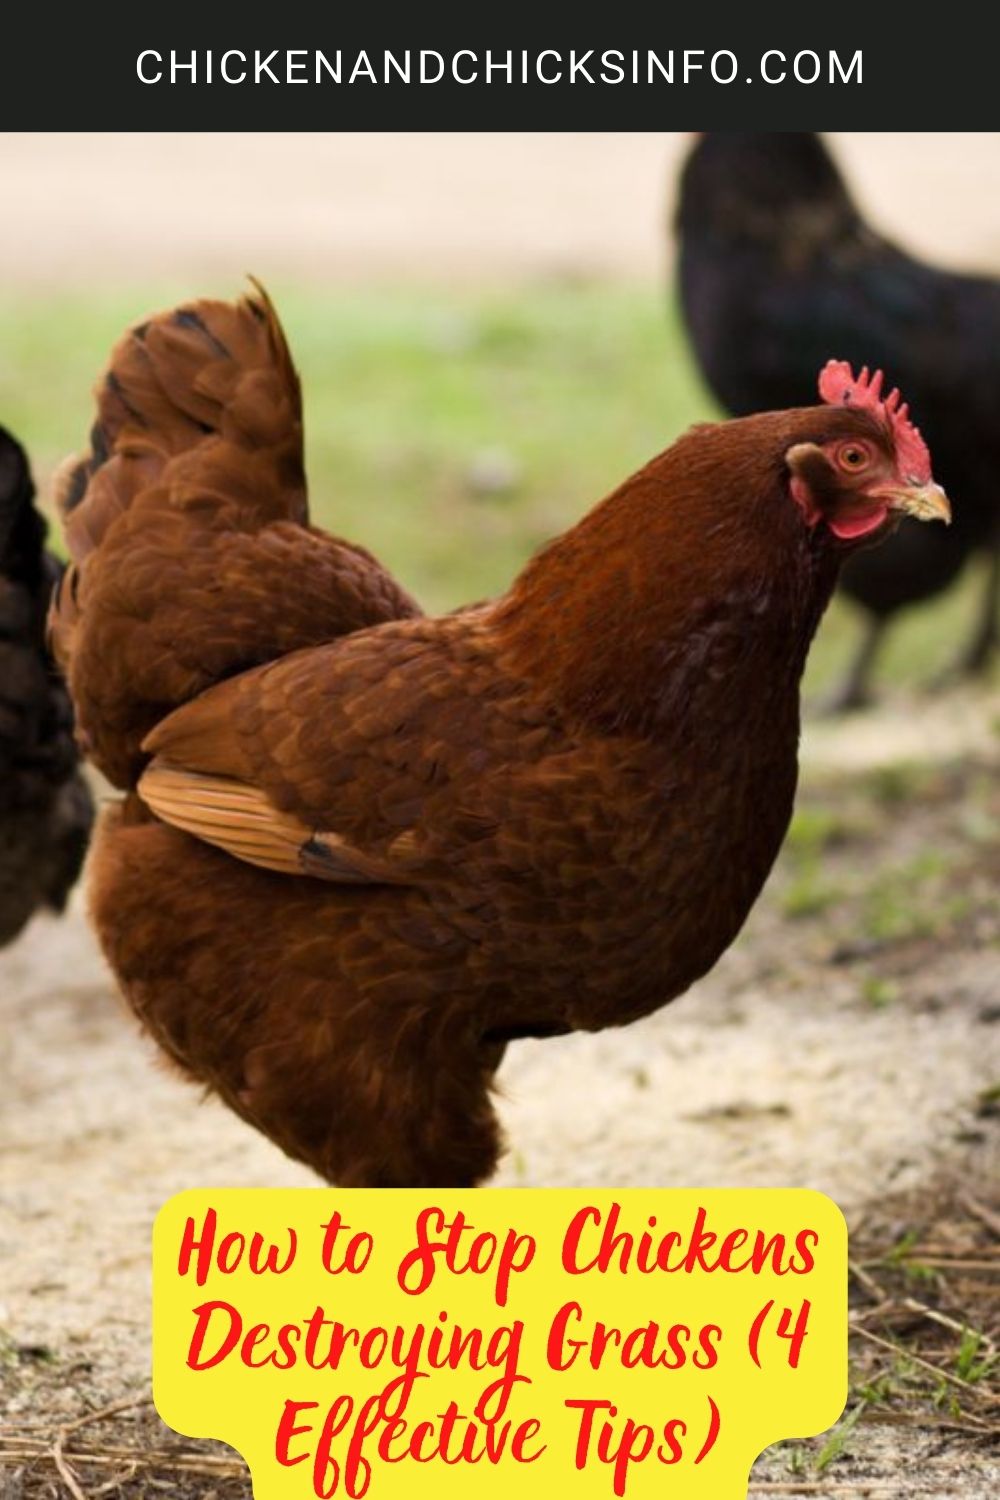 How to Stop Chickens Destroying Grass (4 Effective Tips) poster.
